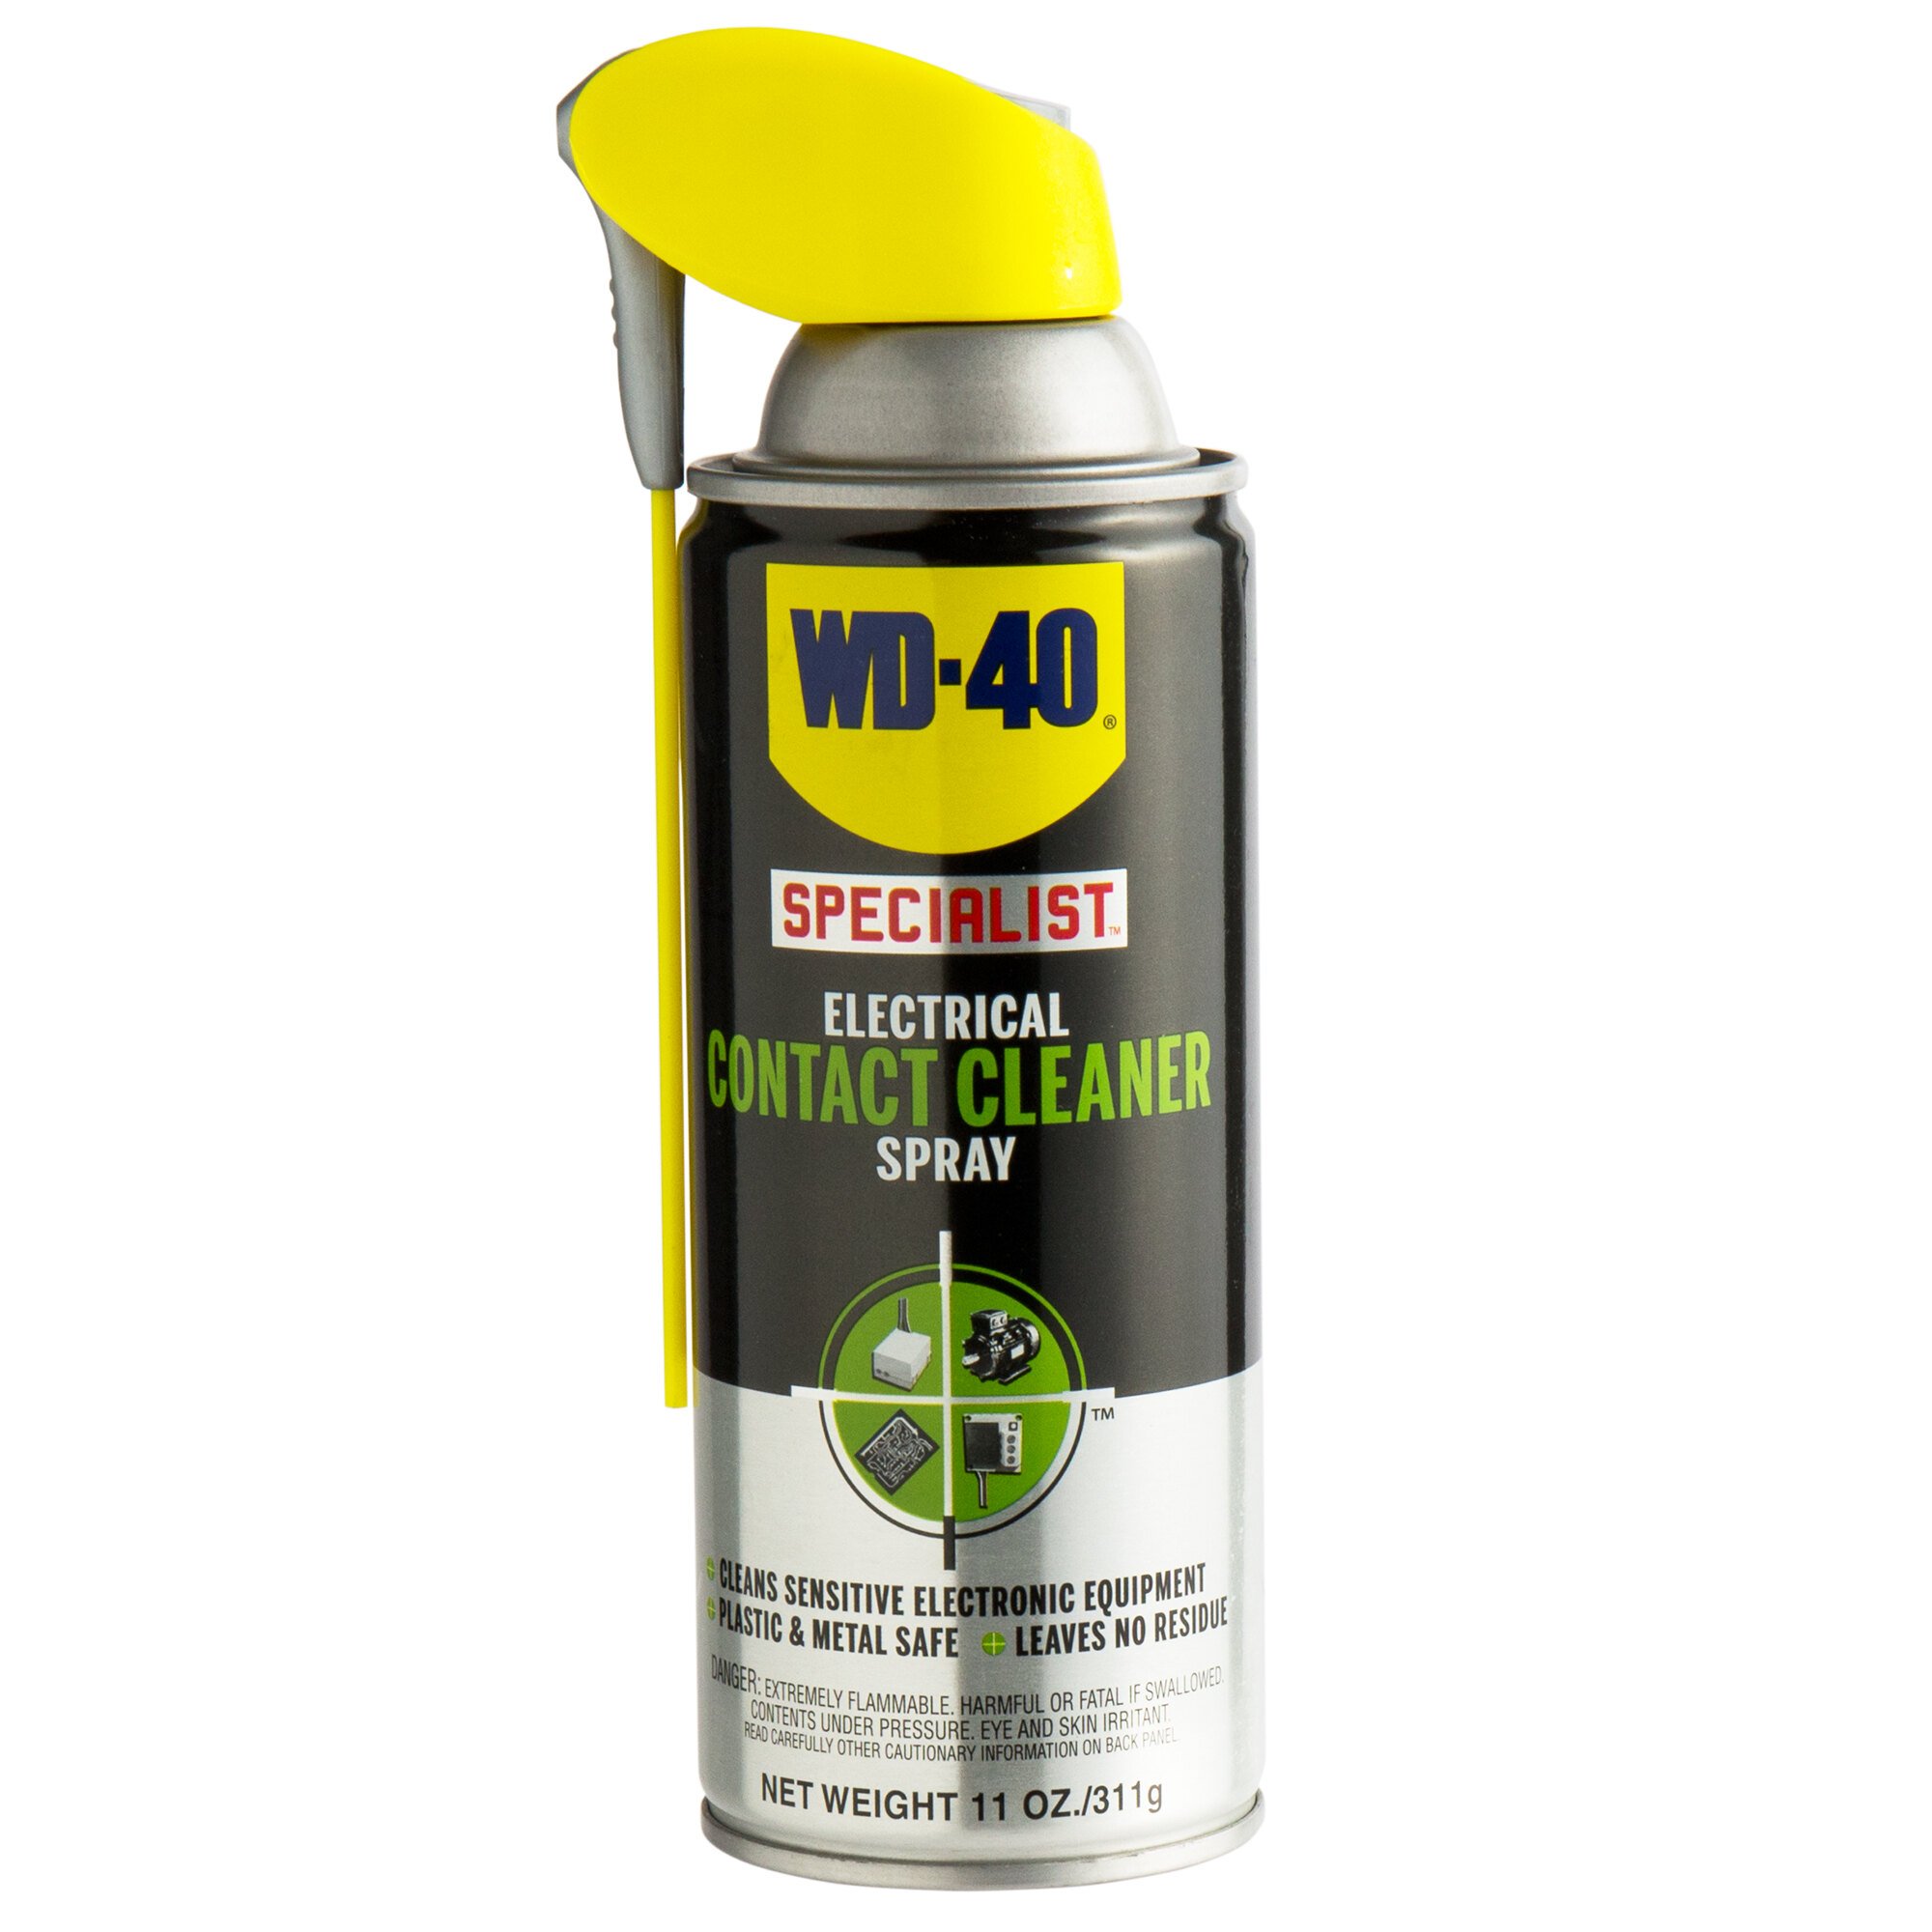 Wd 40 300554 Specialist 11 Oz Electrical Contact Cleaner Spray 6 Case